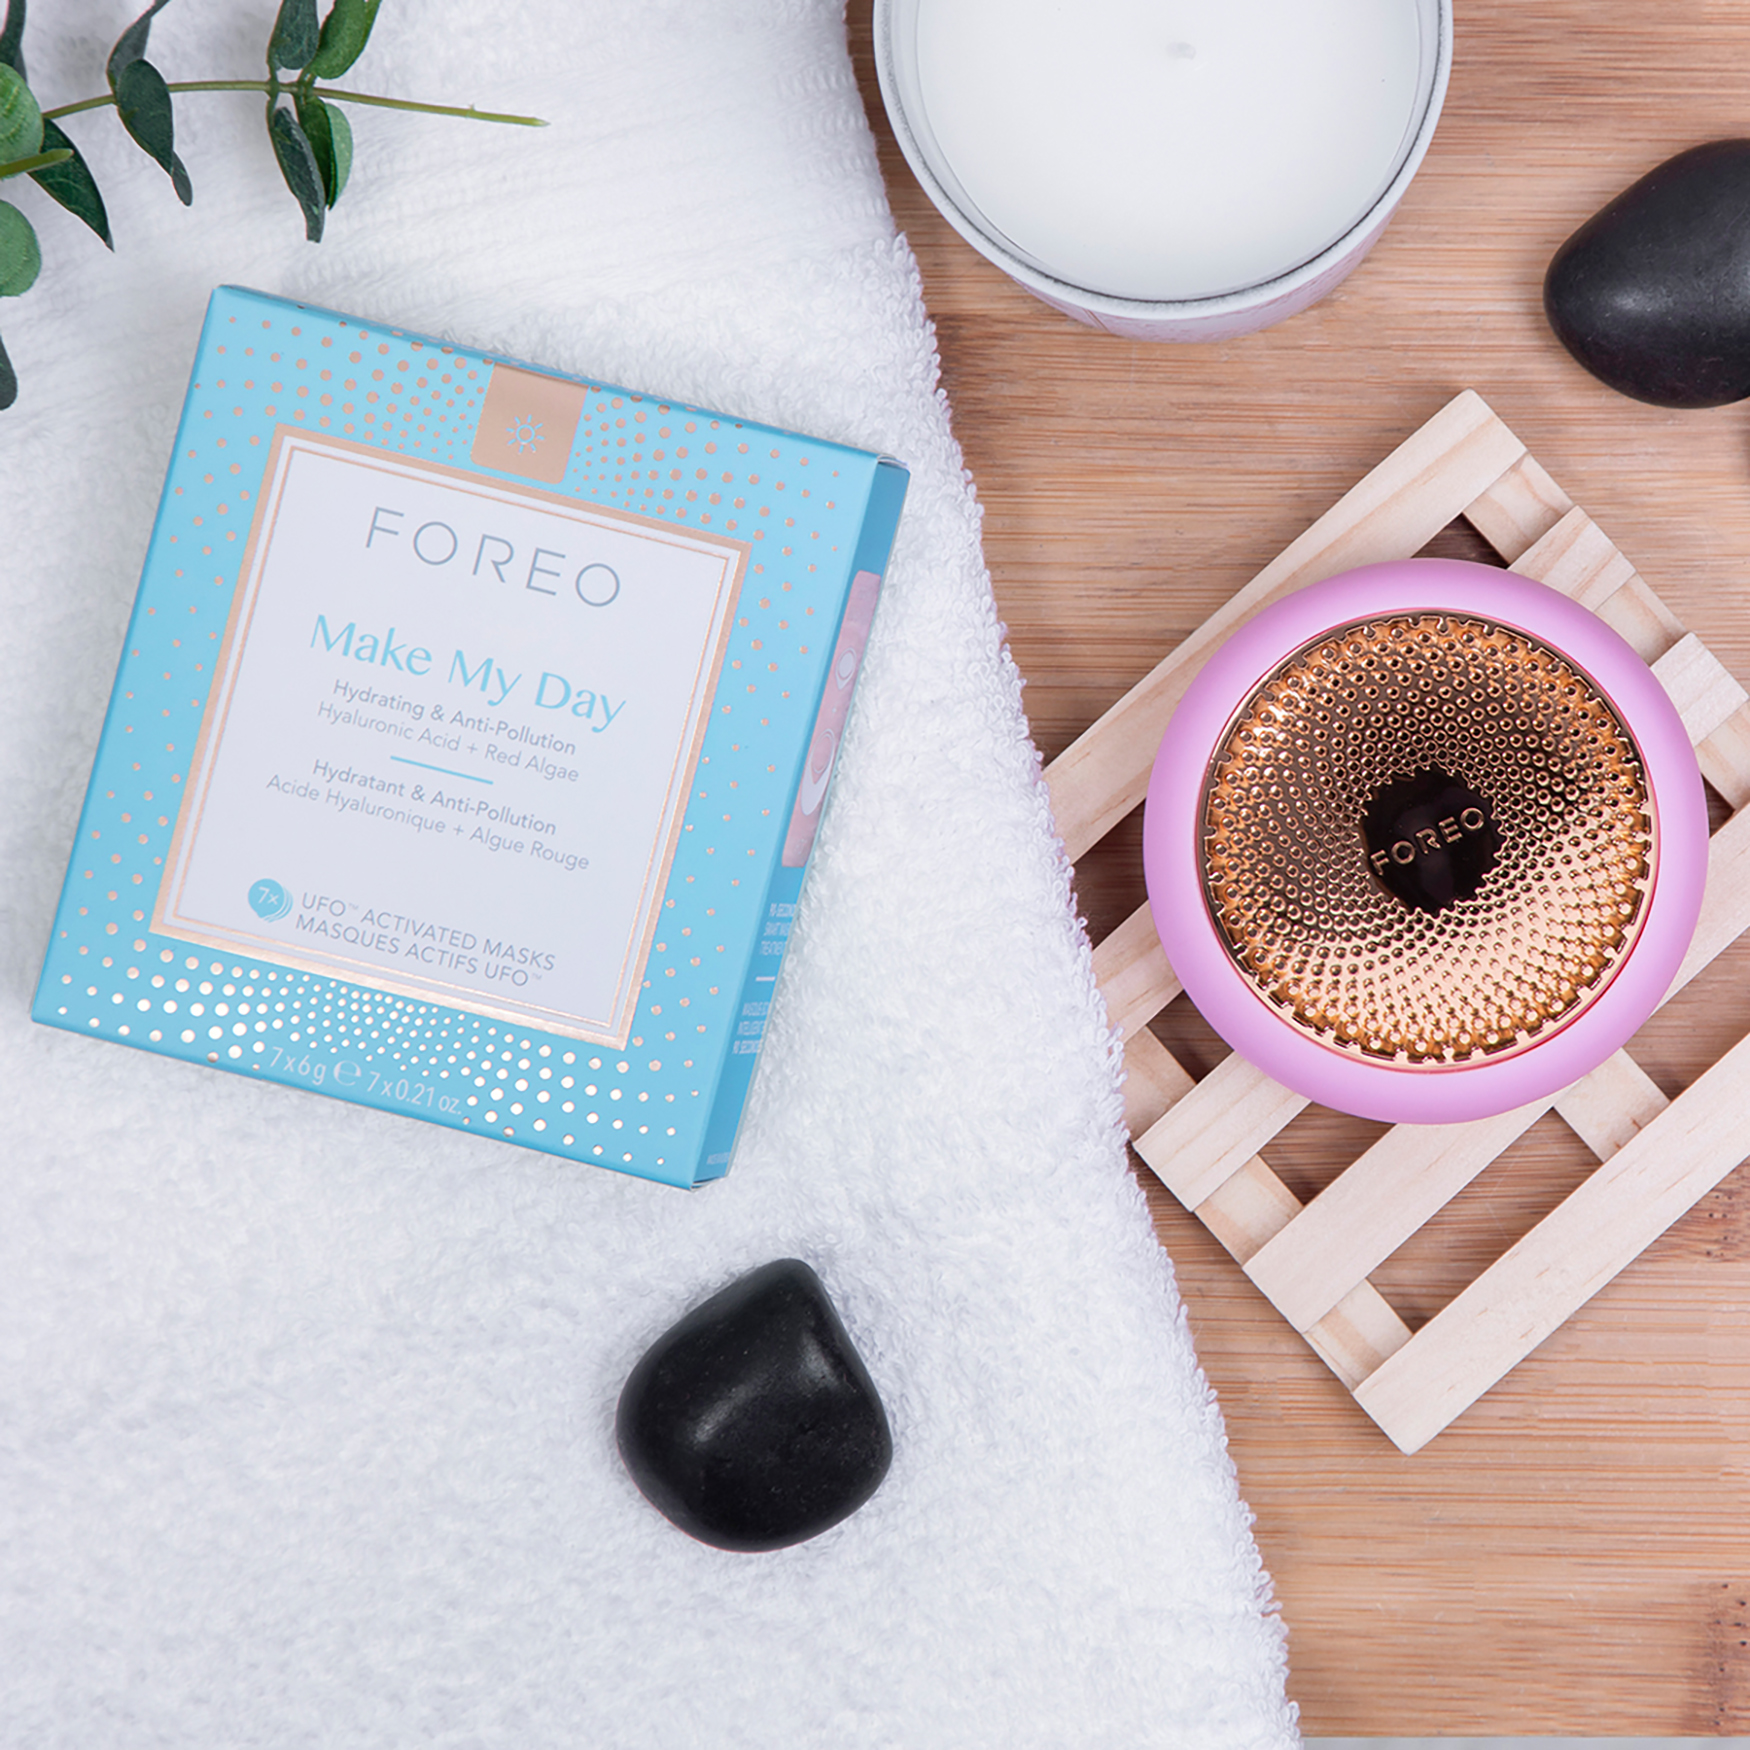 Foreo Make My Day UFO-Activated Masks | Space NK